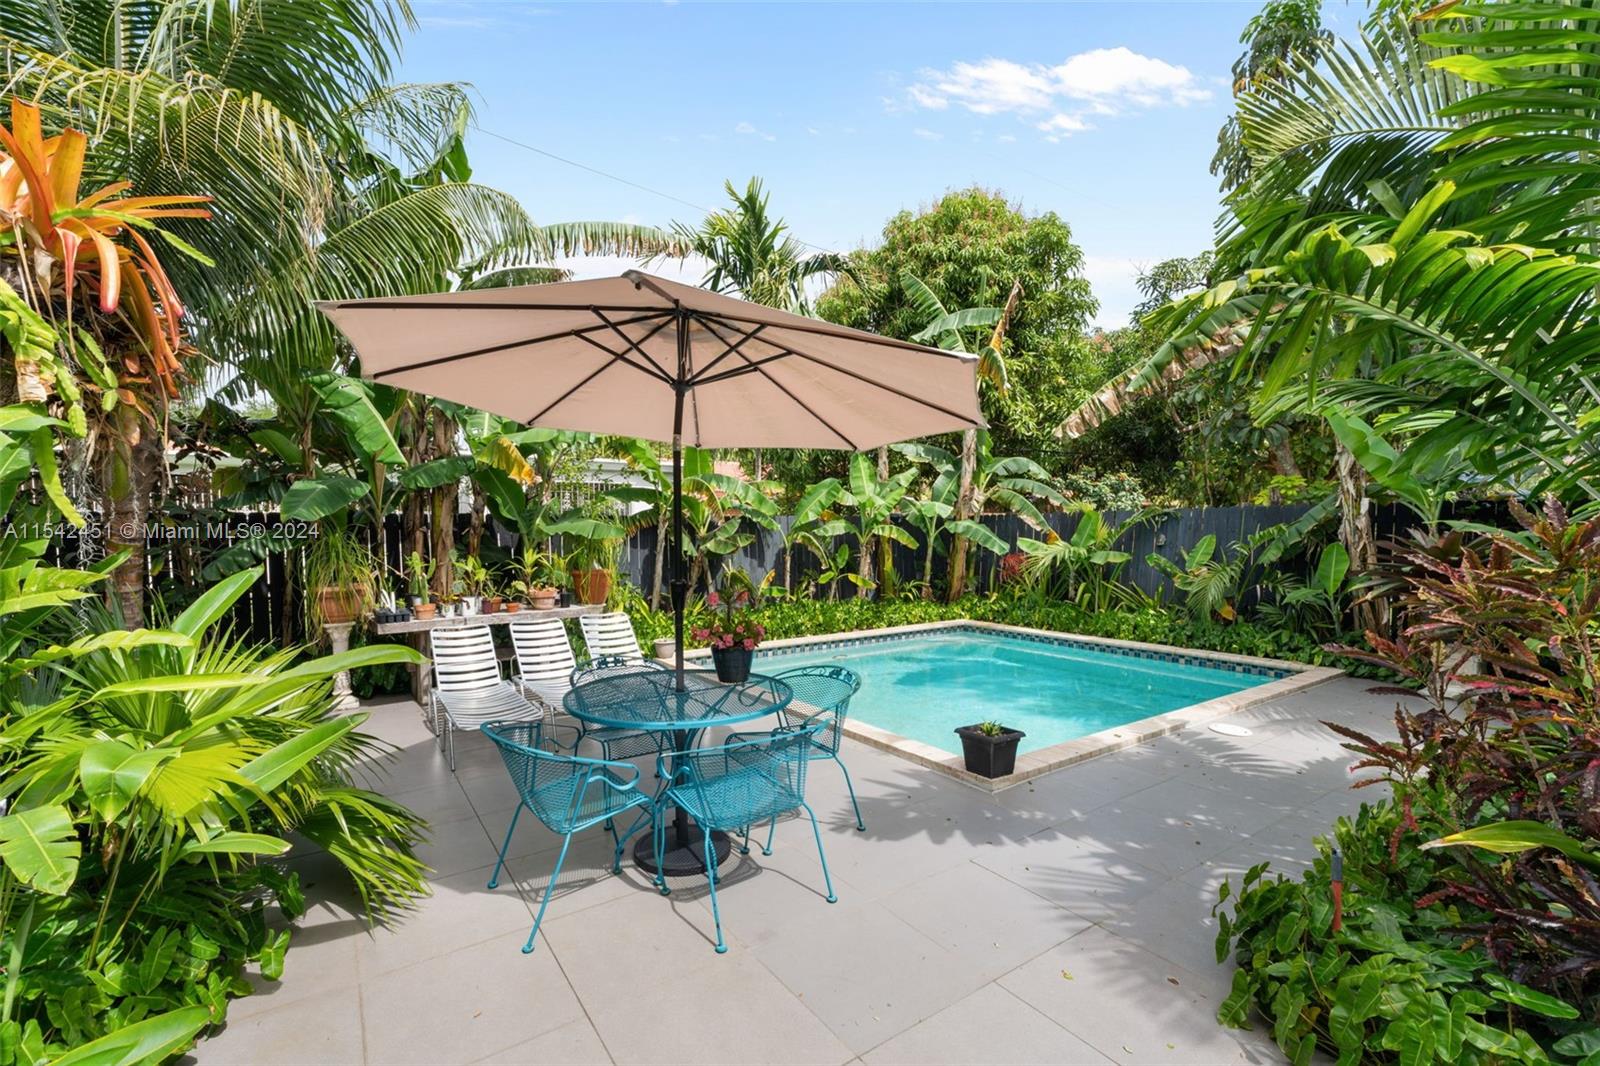 a view of pool with lawn chairs under an umbrella